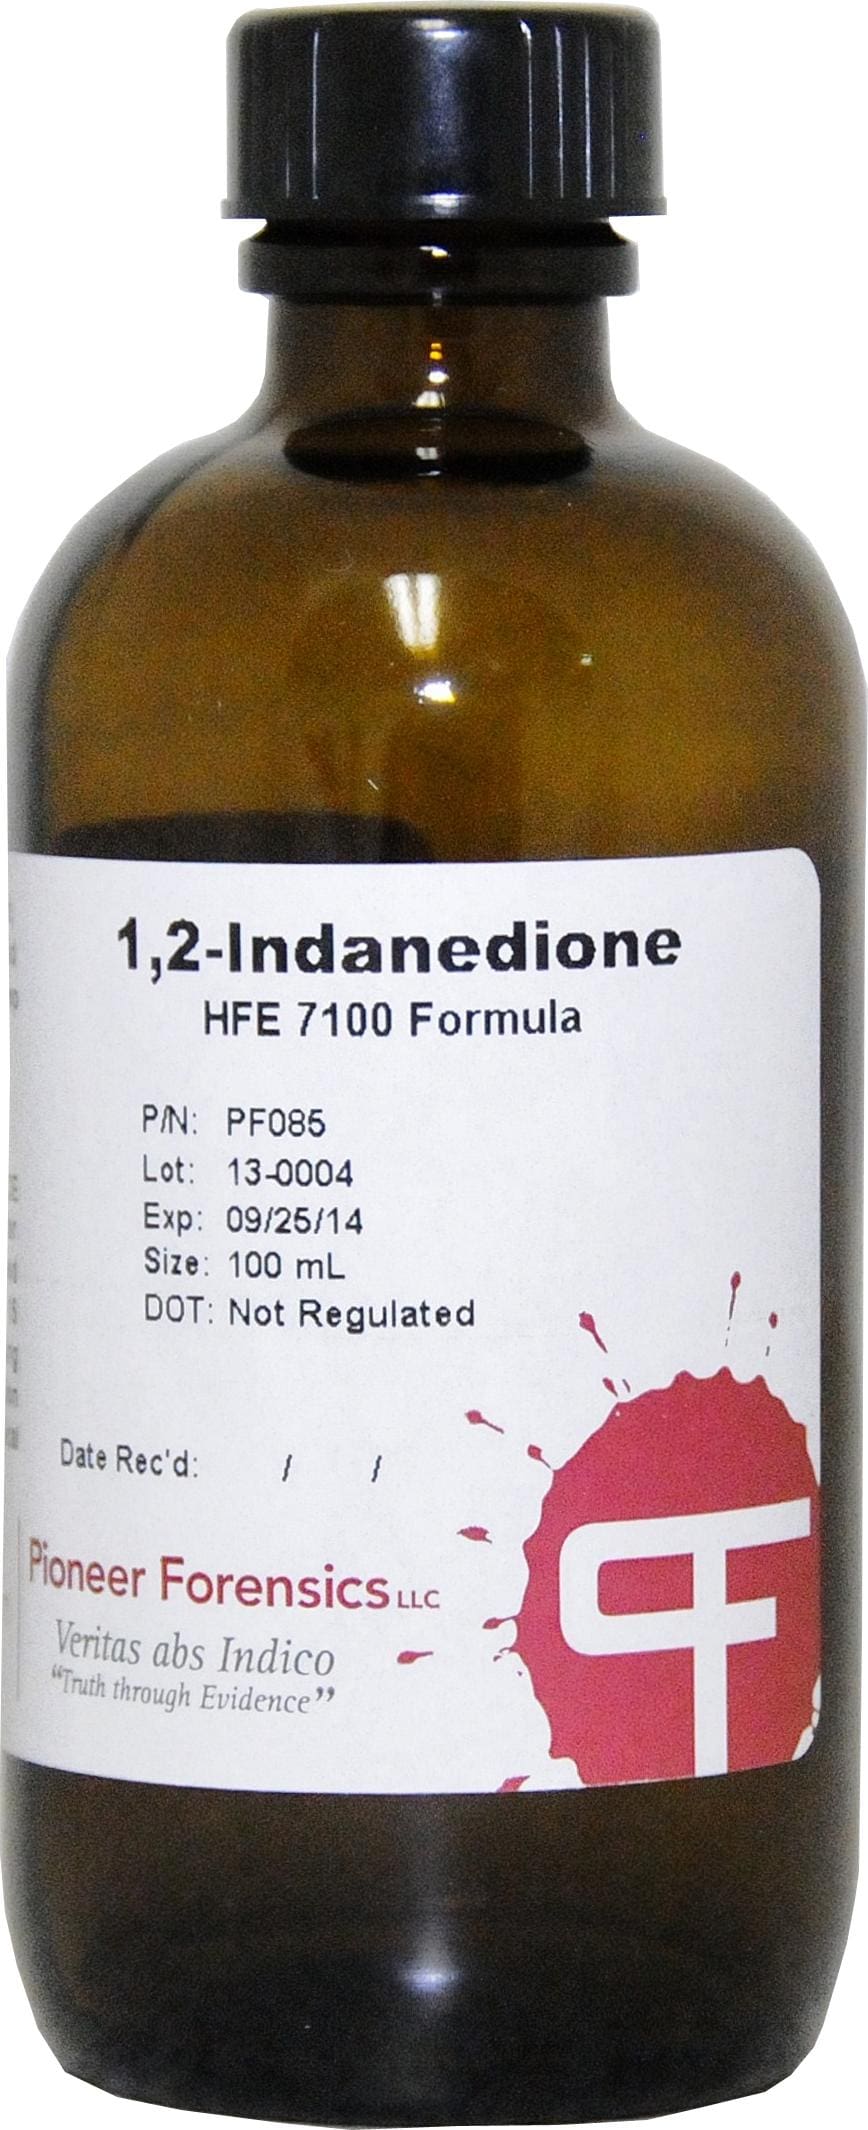 Indandione is extremely sensitive to amino acids in latent finger prints on porous surfaces. It is reported to develop 46% more latent prints than DFO. The consistency and quality make this the best in the industry.